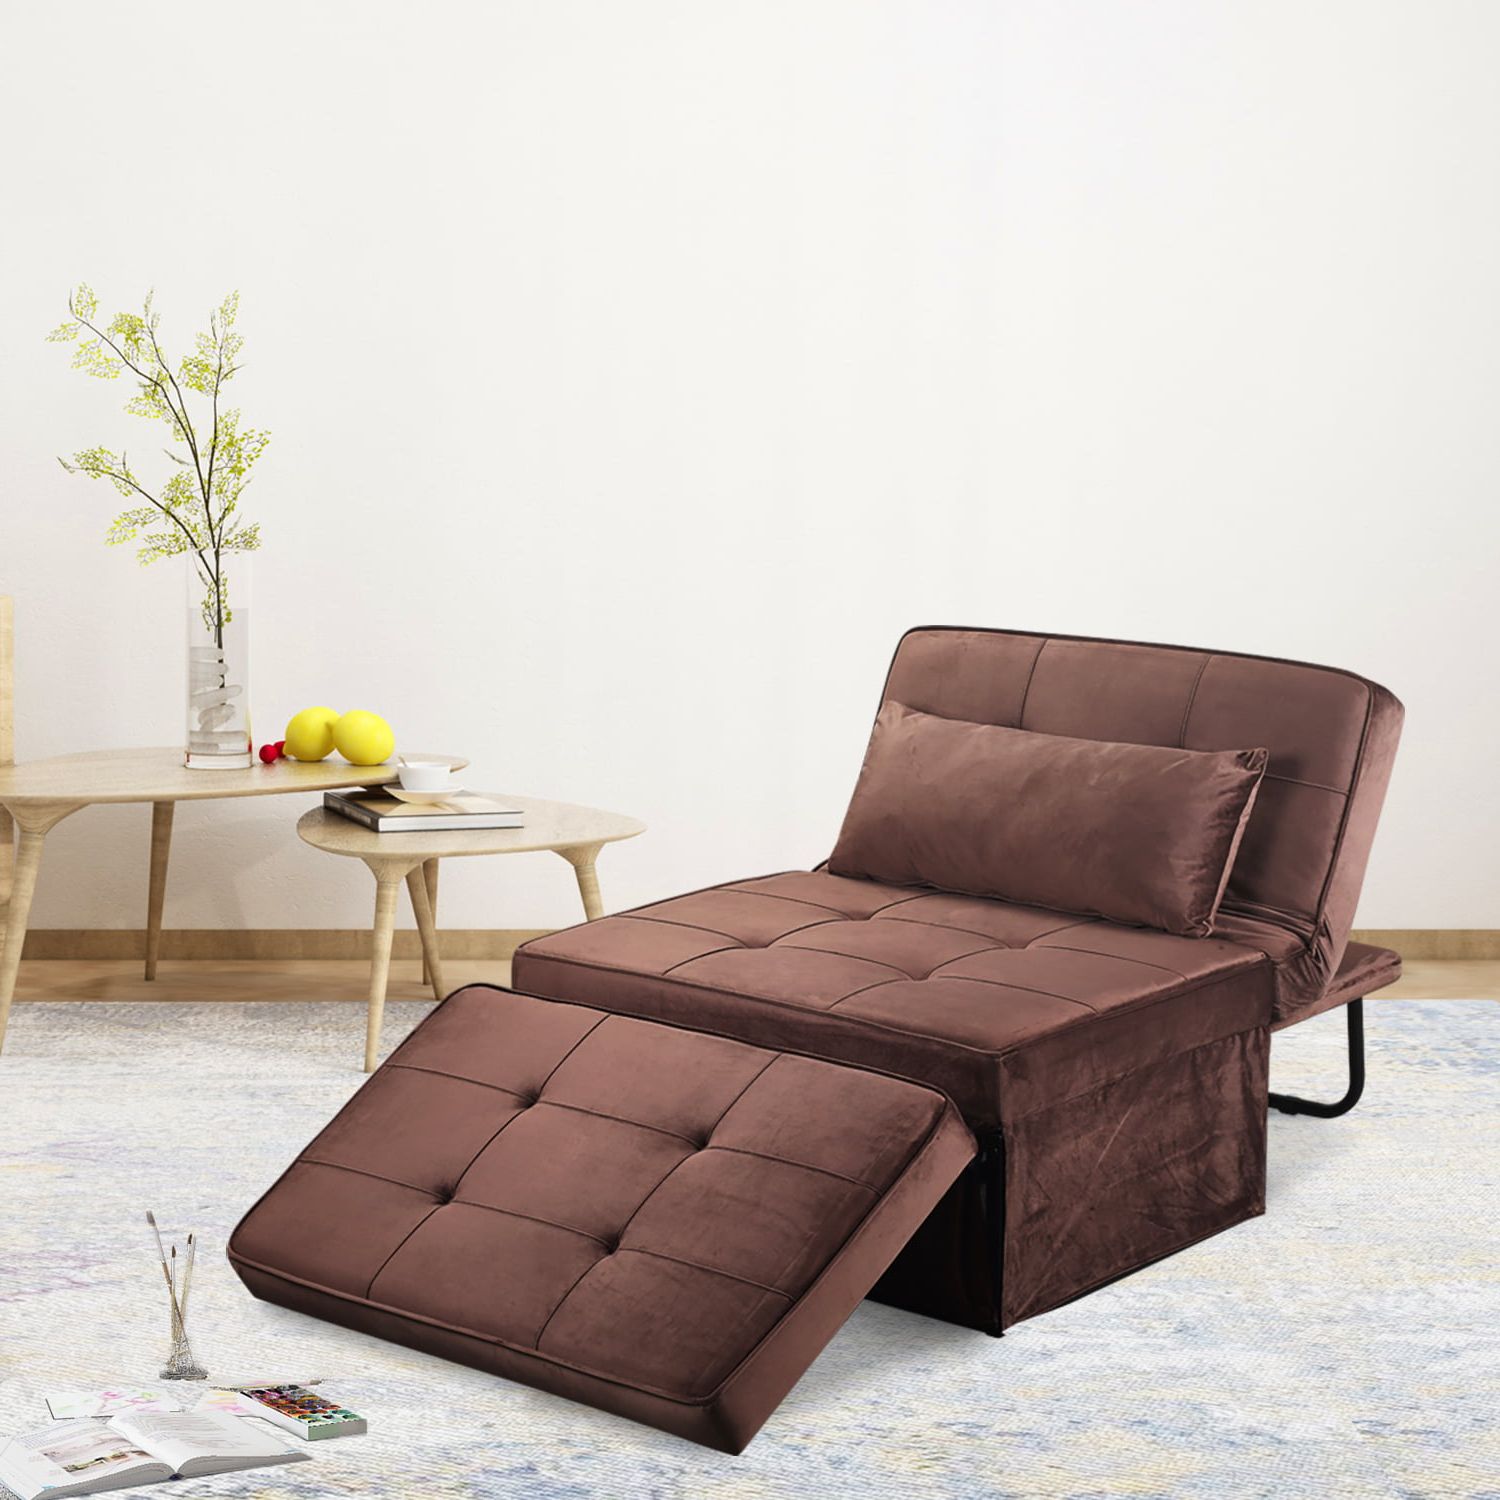 Ainfox 4 In 1 Ottoman Sleeper Guest Chair Sofa Bed Multi Function Throughout 4 In 1 Convertible Sleeper Chair Beds (View 6 of 20)